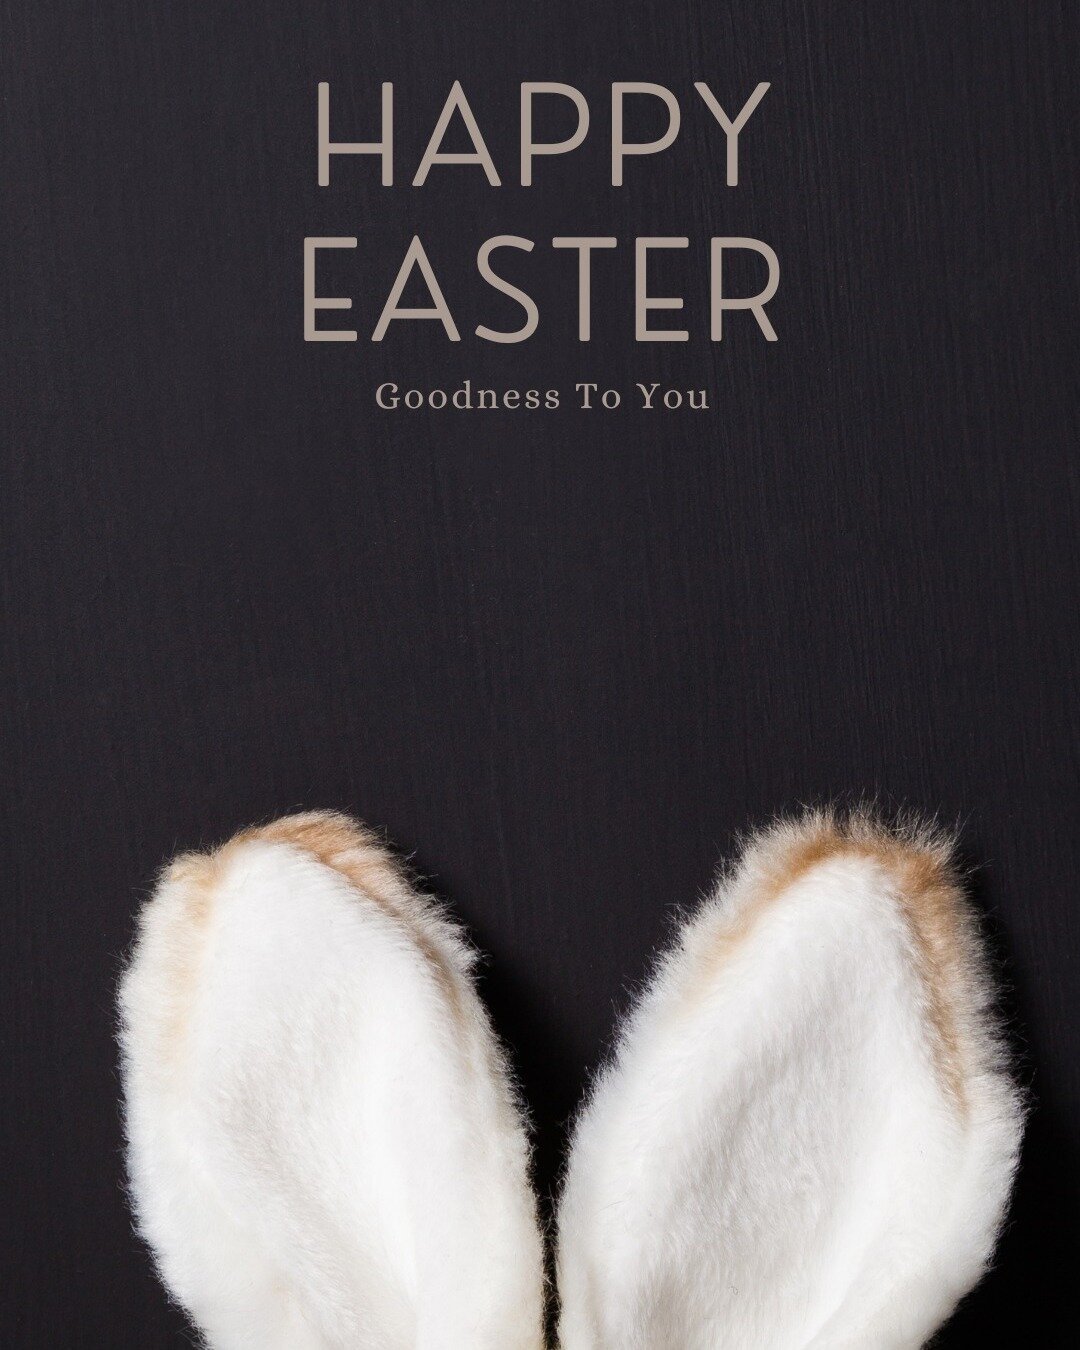 Happy Easter To Everyone! 

#easter #eastersunday #happyeaster #sunday